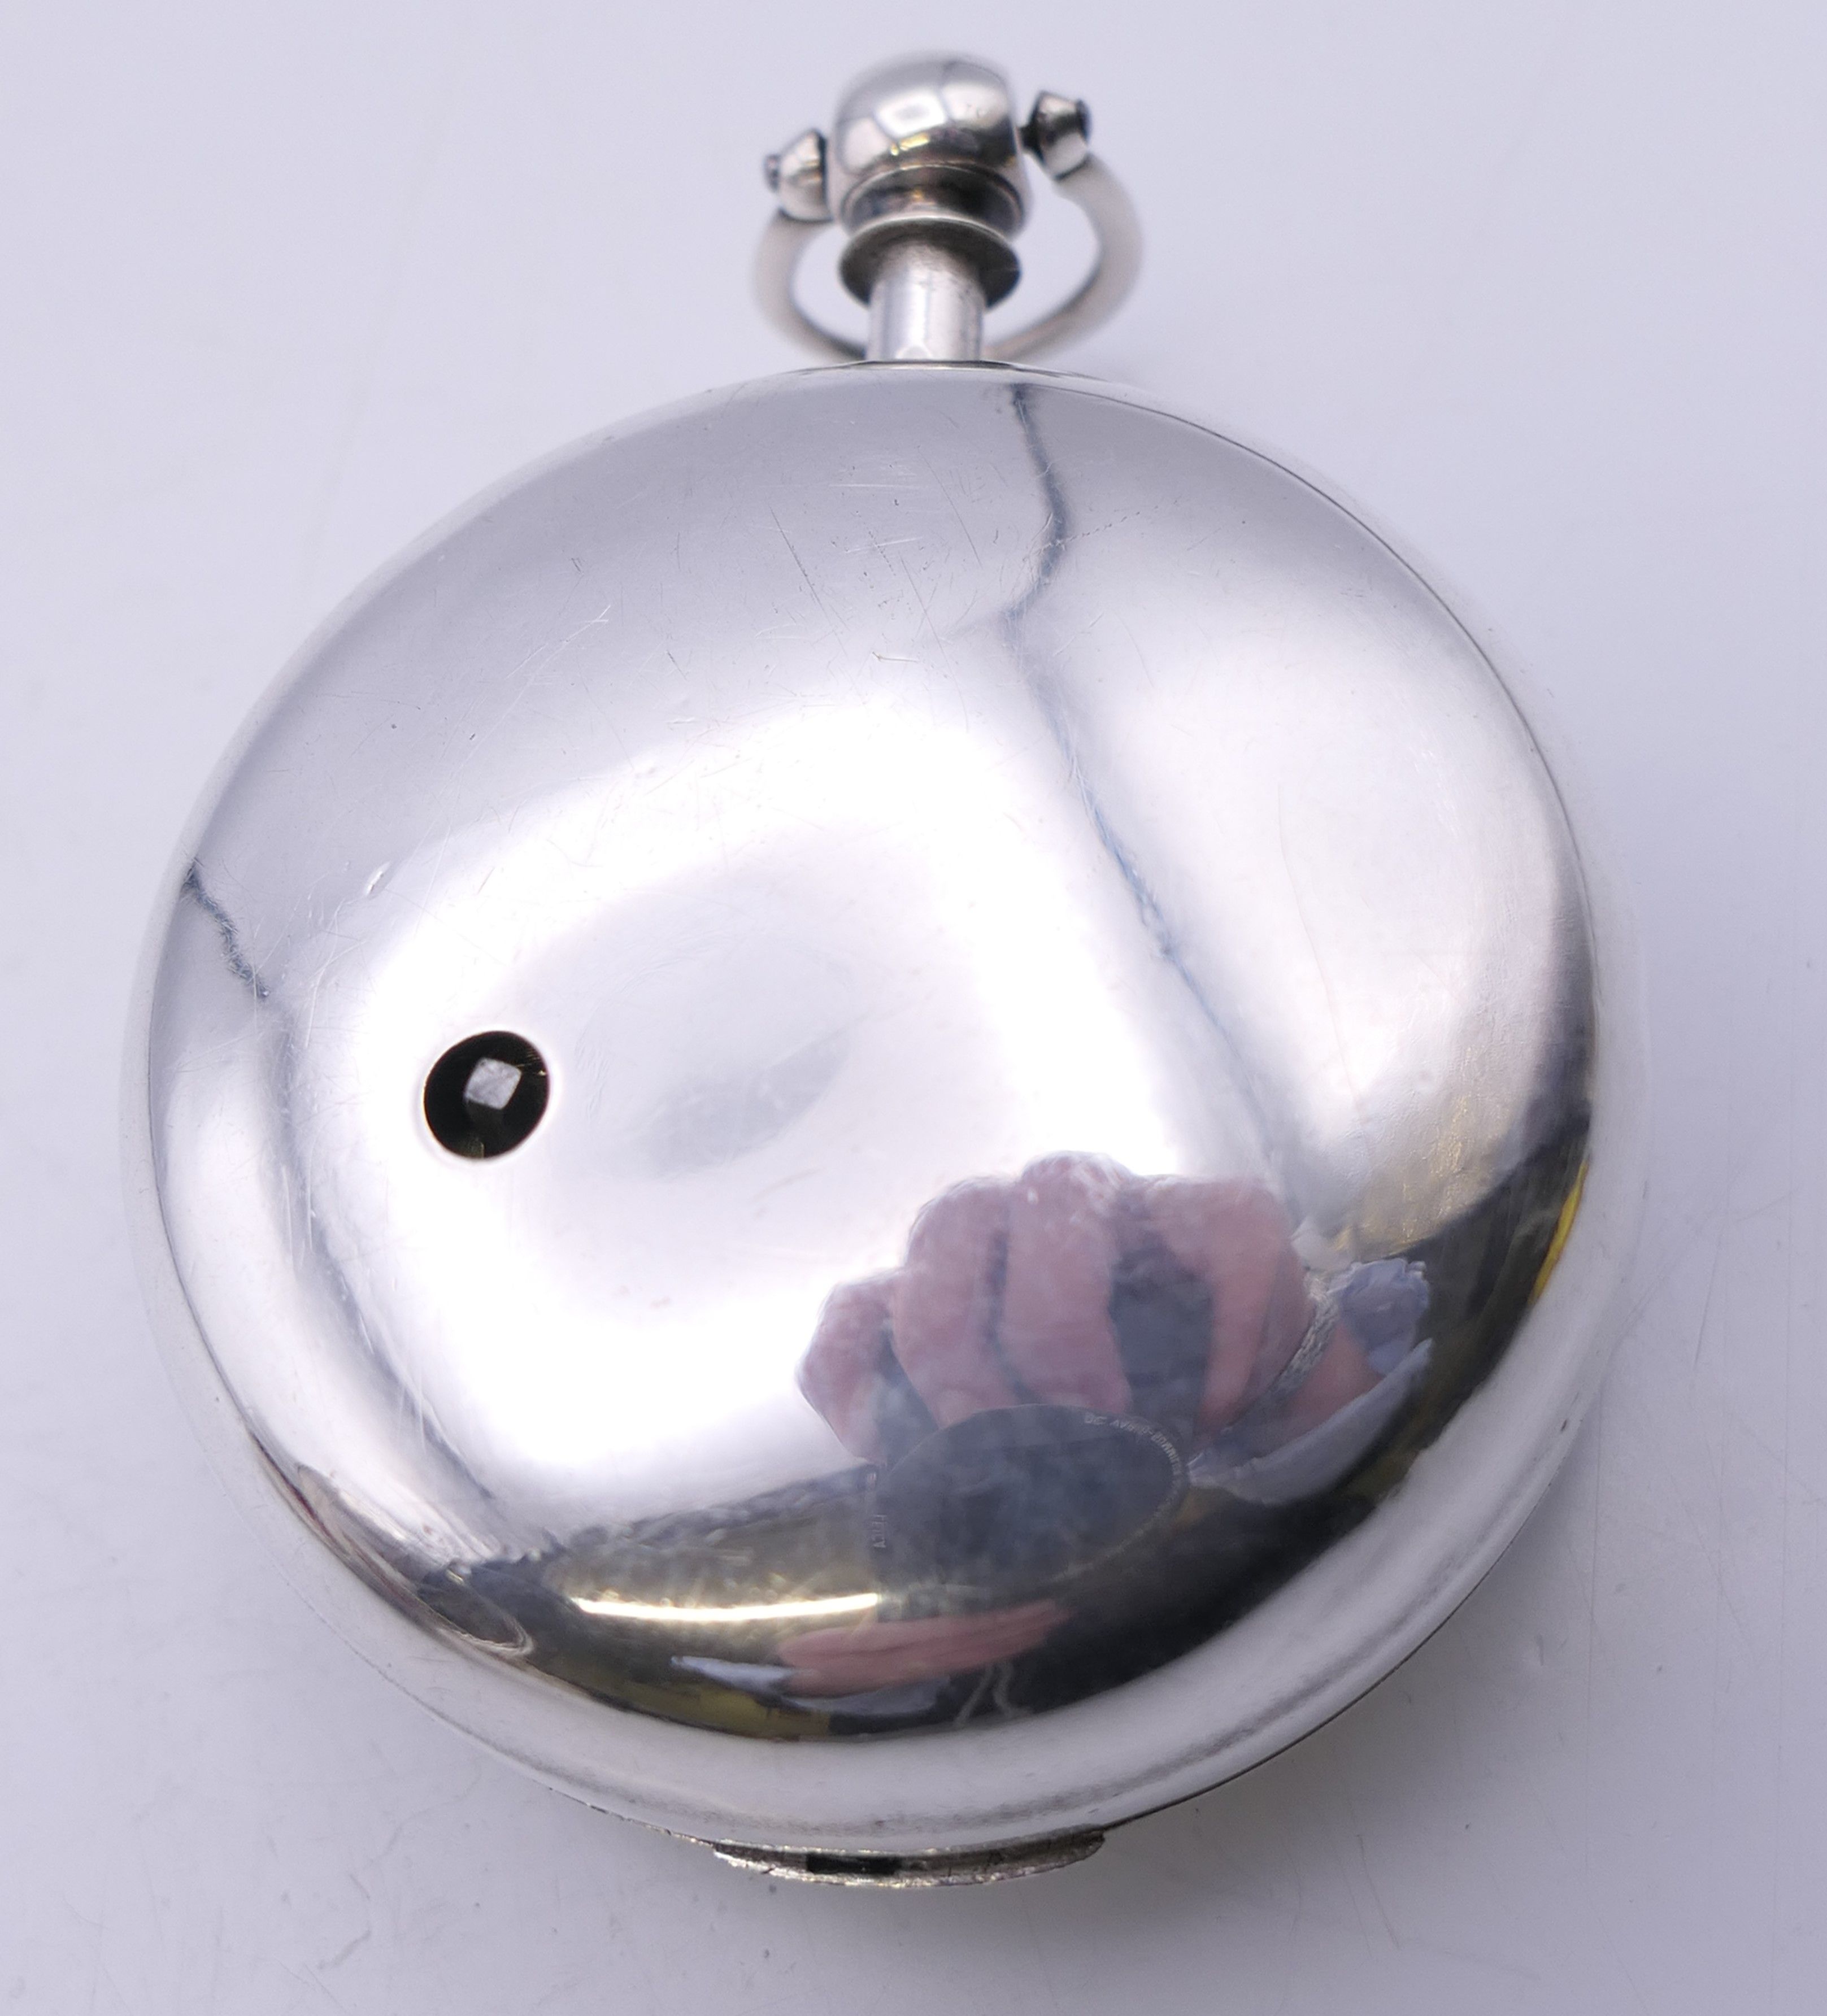 A W Tanner Watchmaker silver pair cased pocket watch, hallmarked Chester 1876, serial number 172. - Image 6 of 10